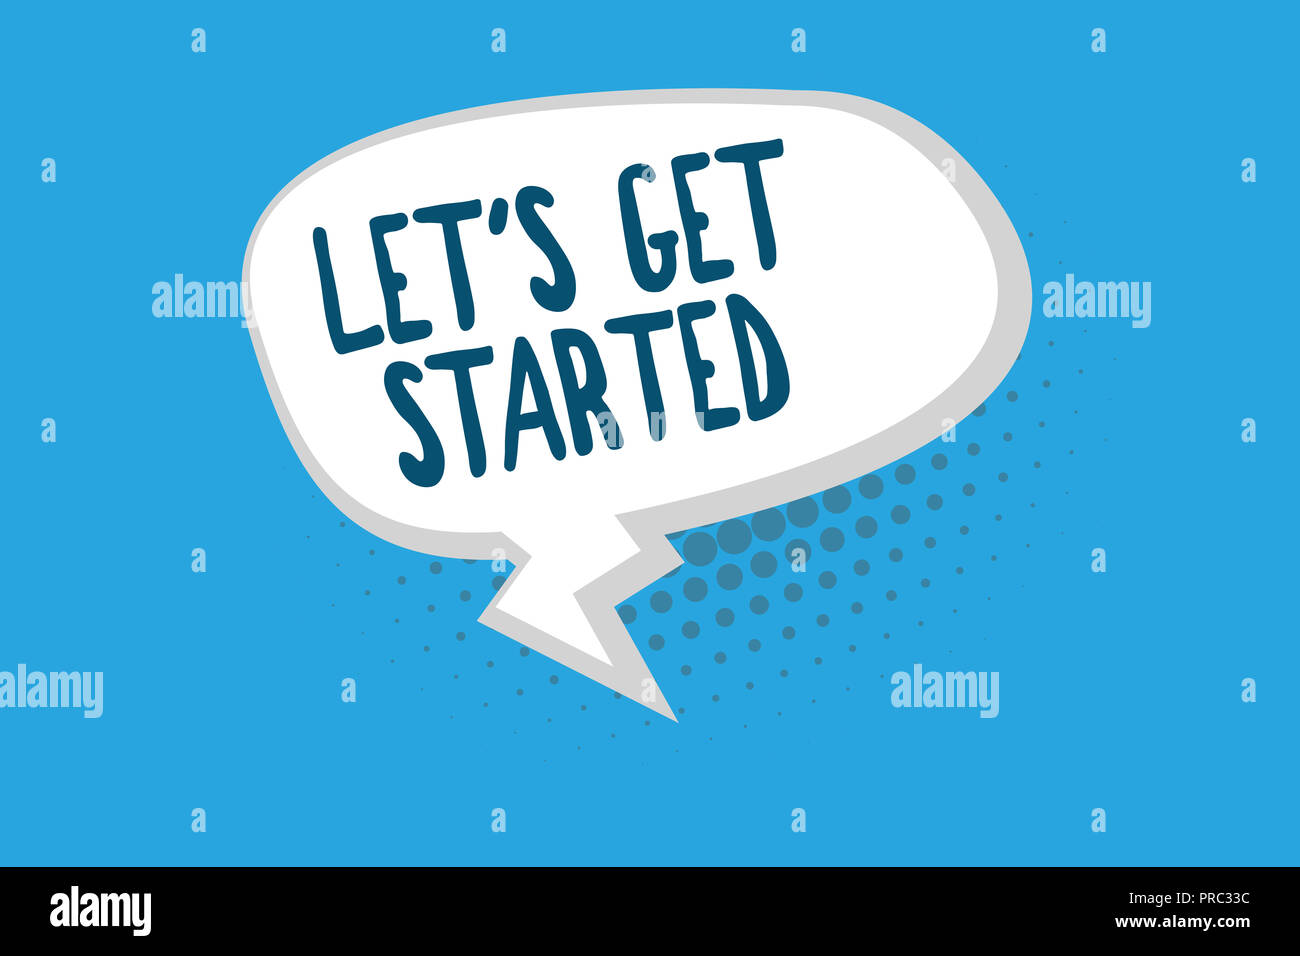 Lets get is started. Let's get started Сток. To begin картинка. Get started. Happy start логотип.